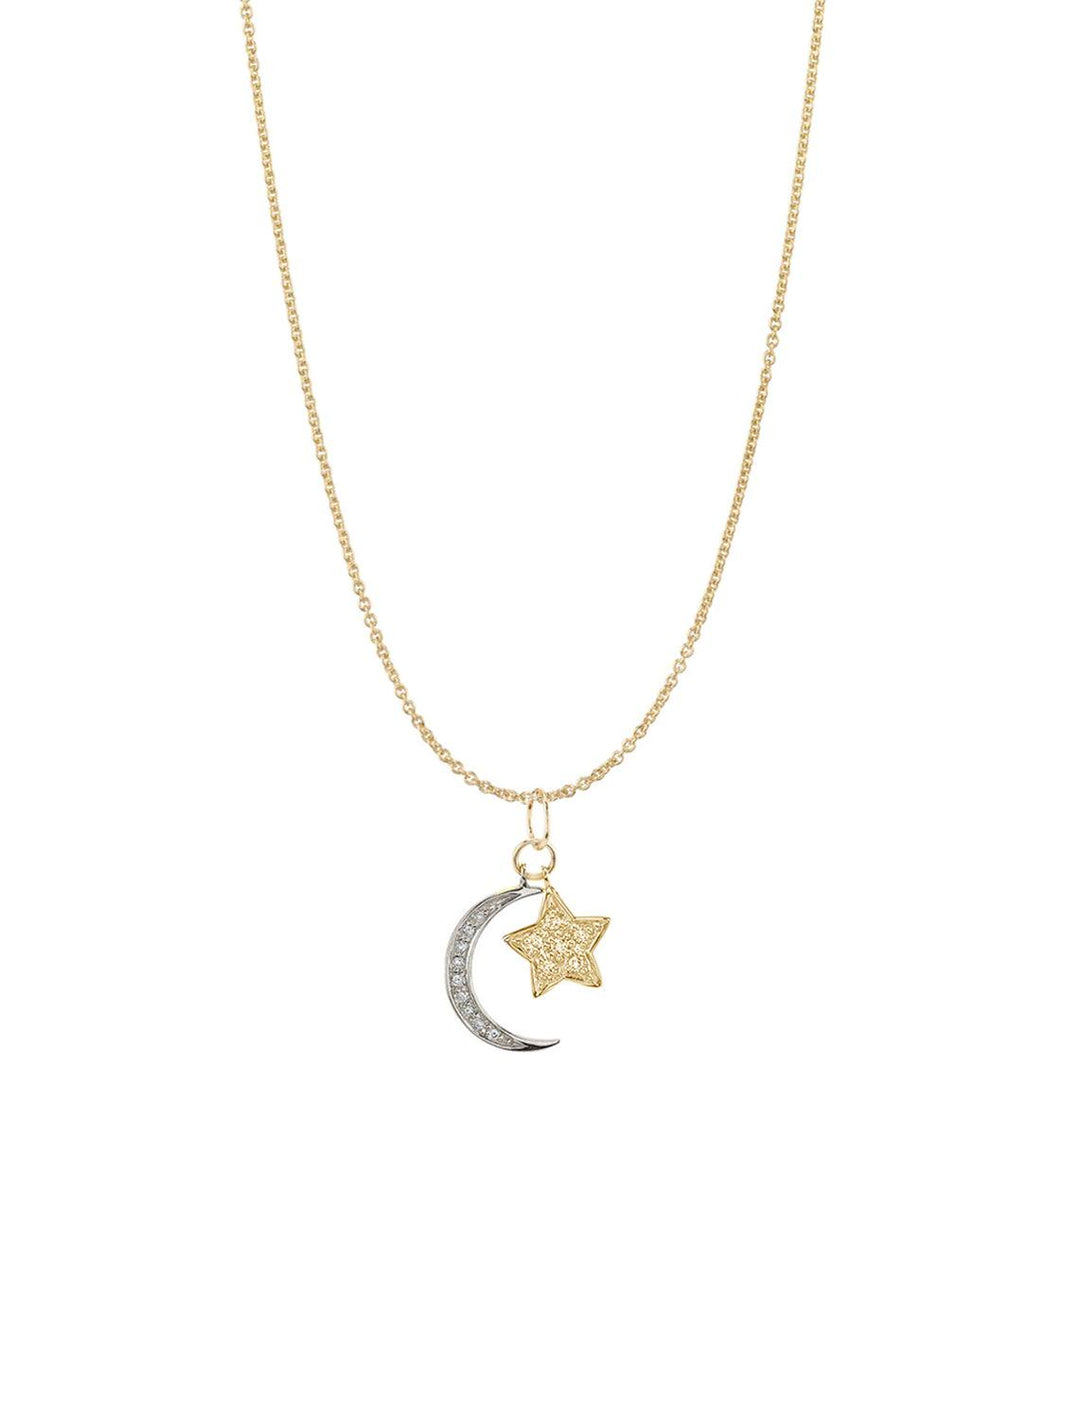 Sydney Evan gold and diamond moon and star charm necklace - Twigs